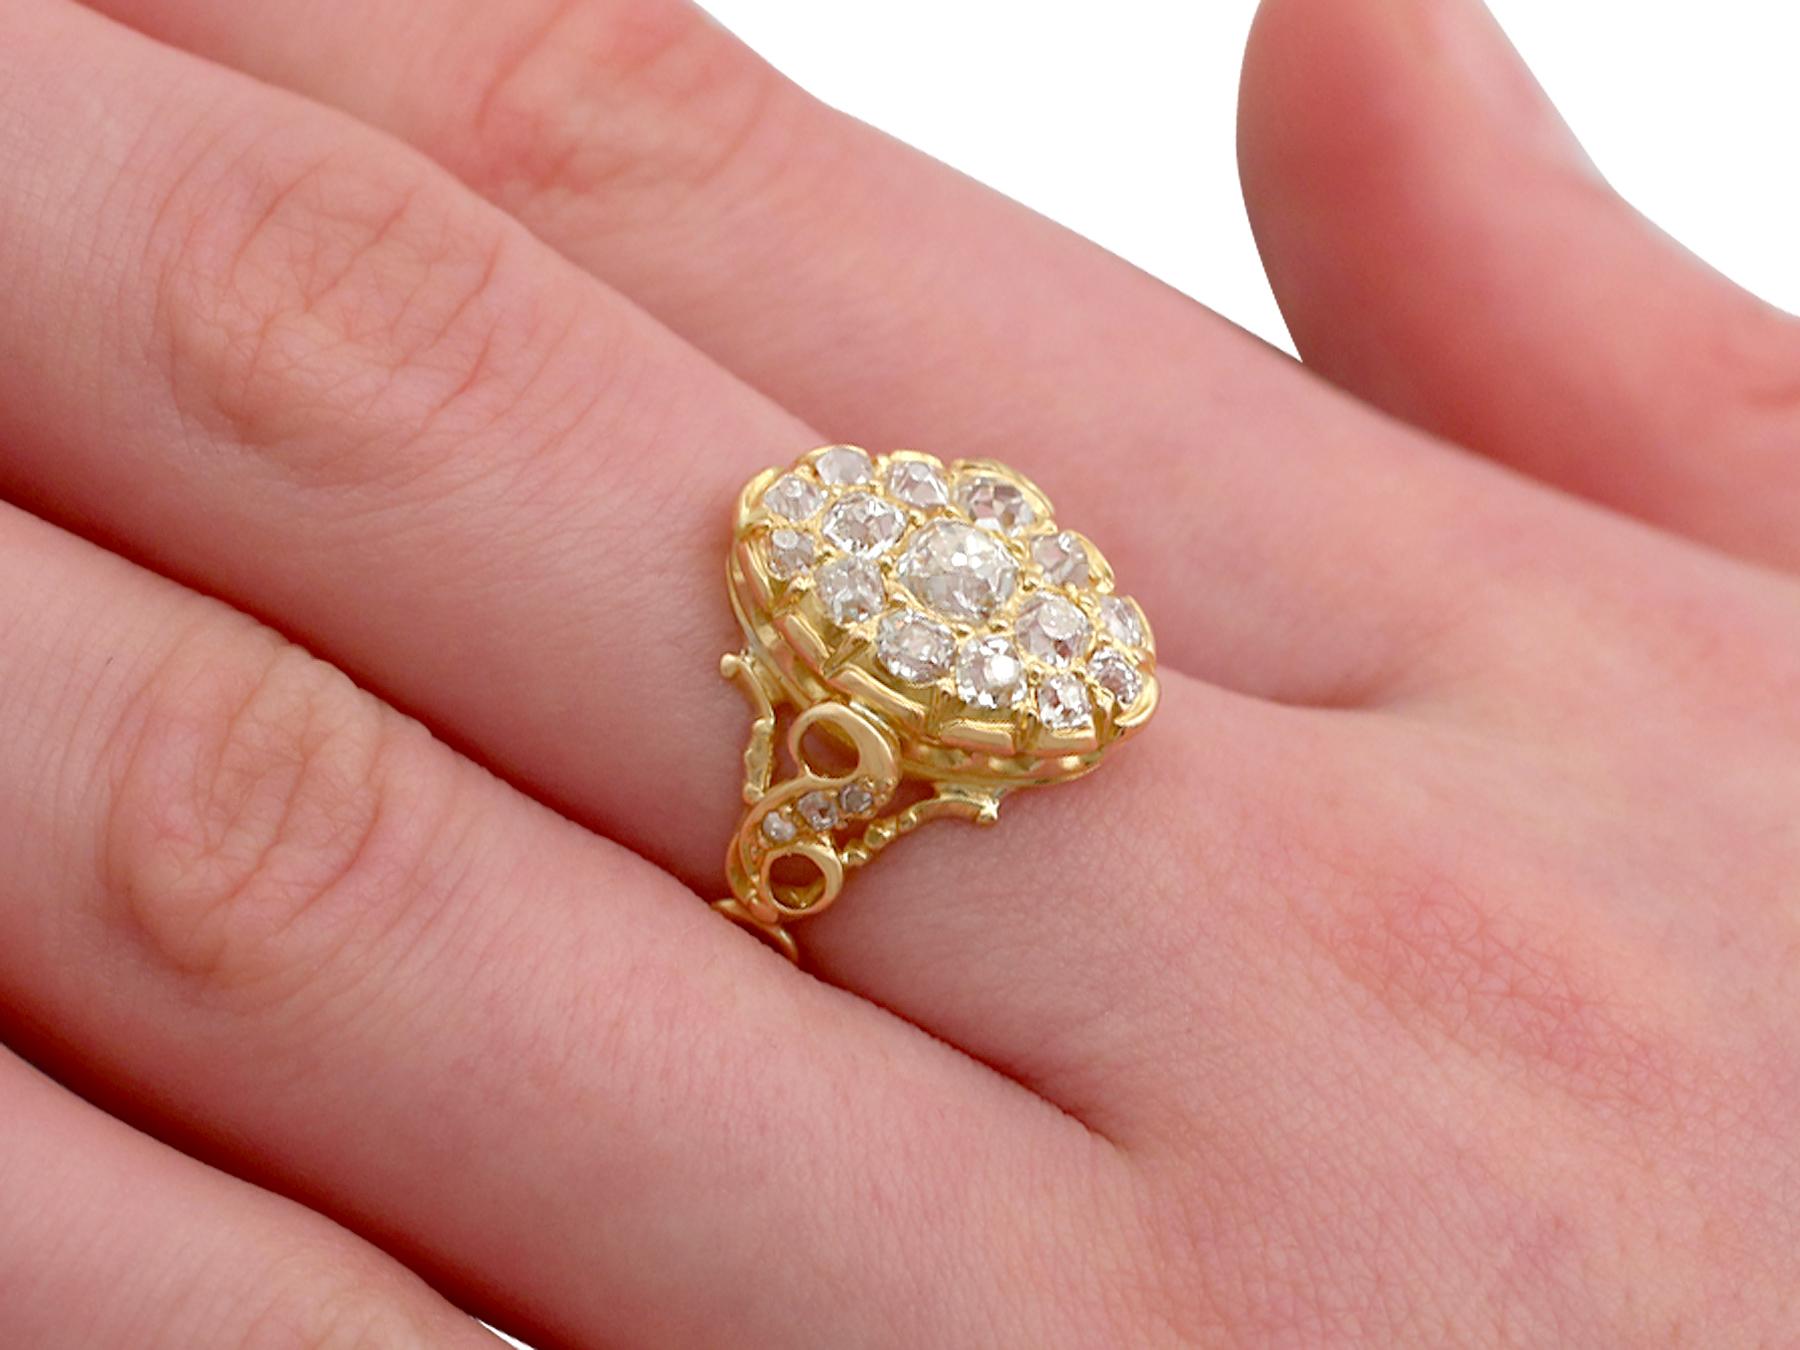 1870s Antique Victorian 1.51 Carat Diamond and Yellow Gold Cocktail Ring 3